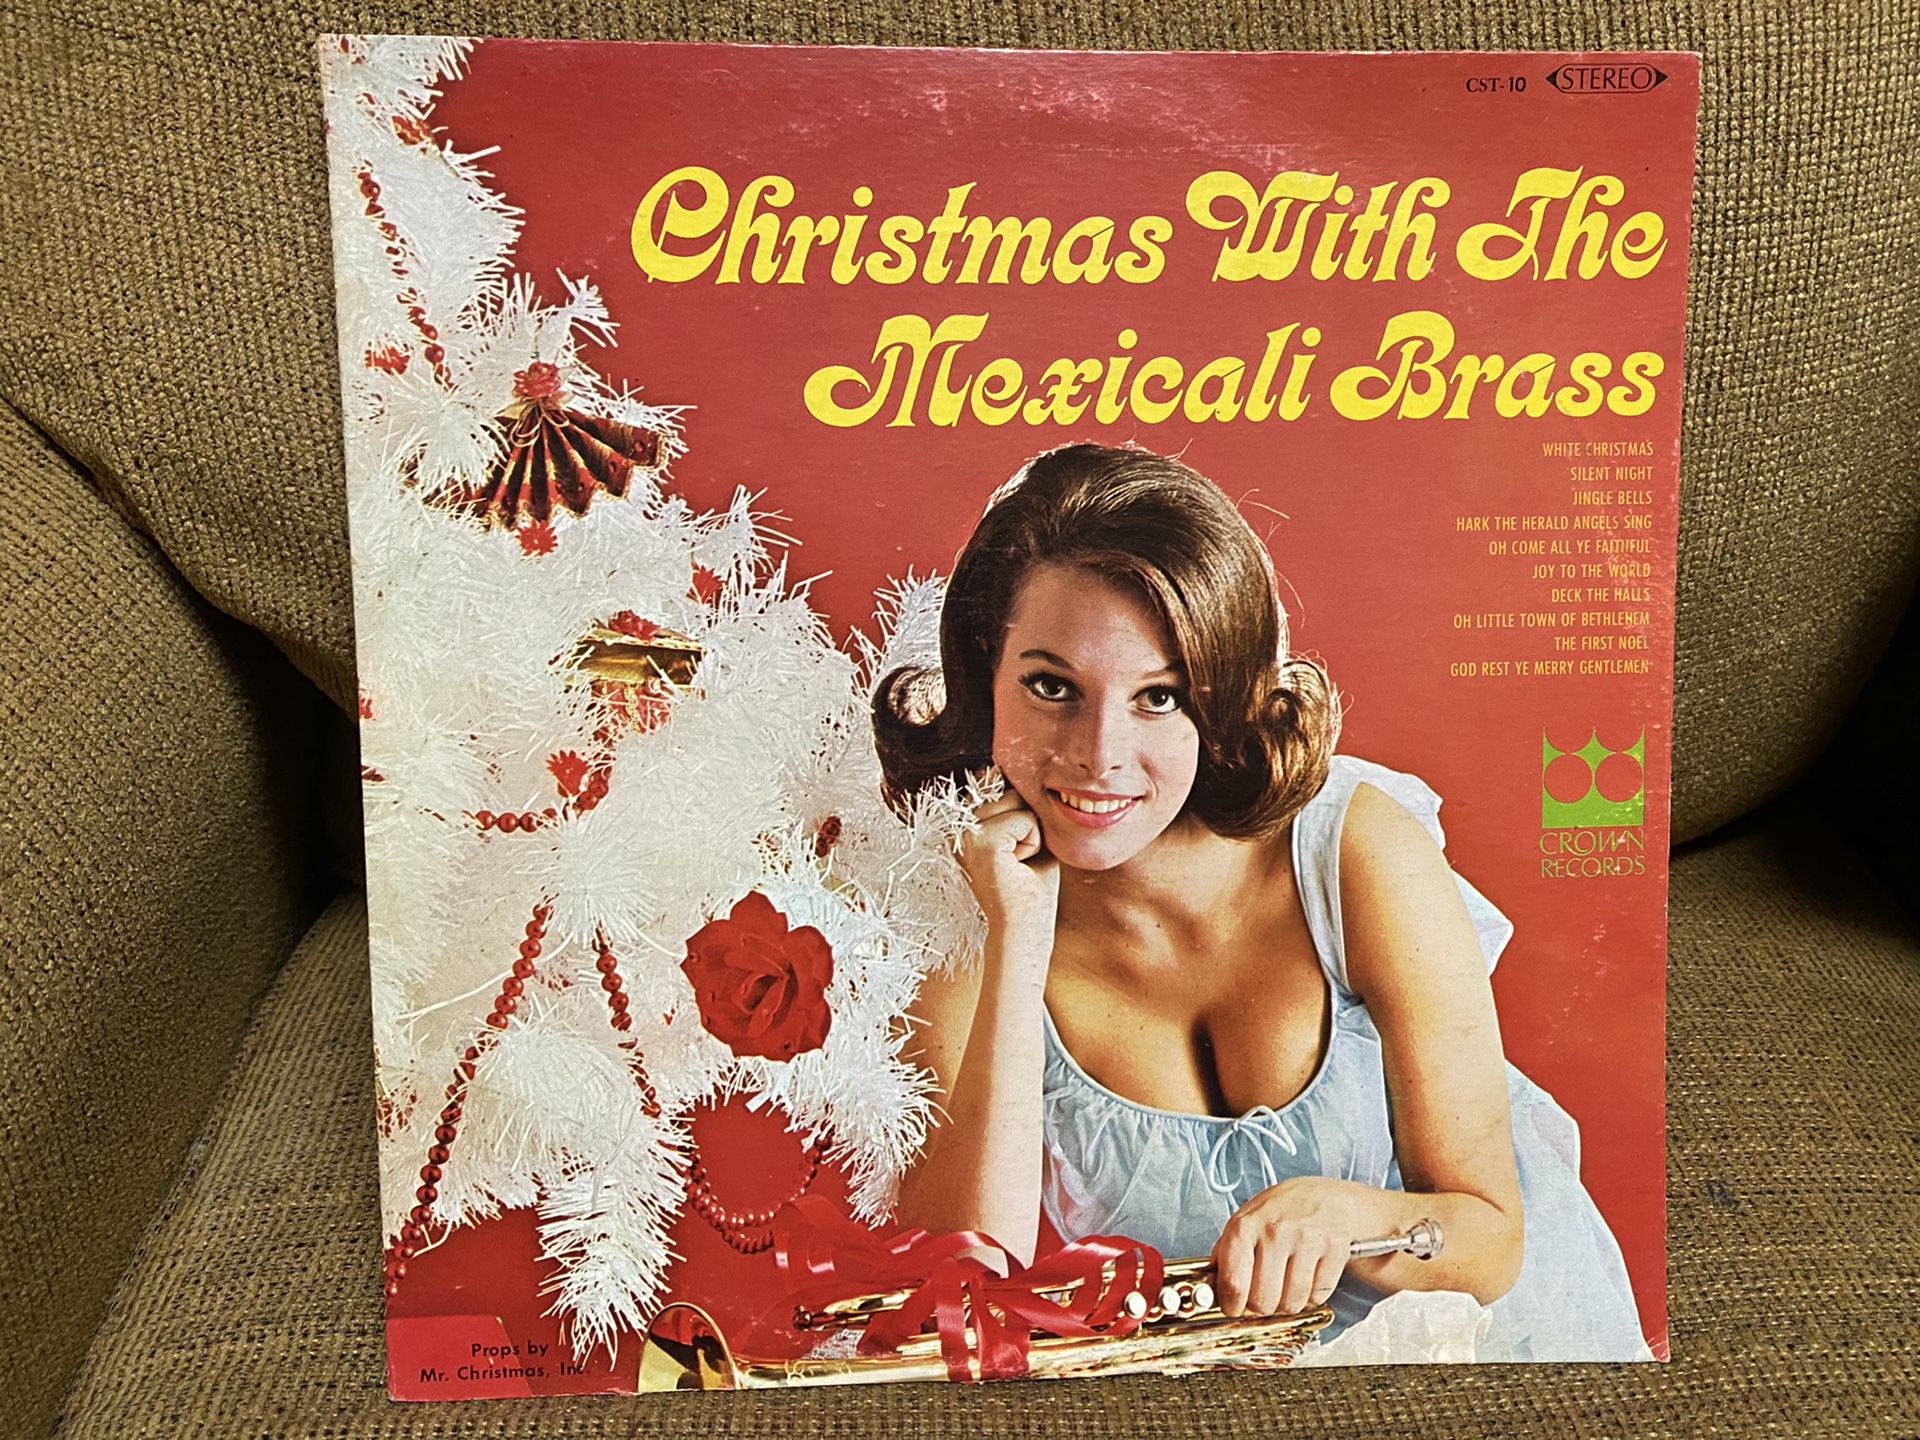 Christmas With the Mexicali Brass vinyl record